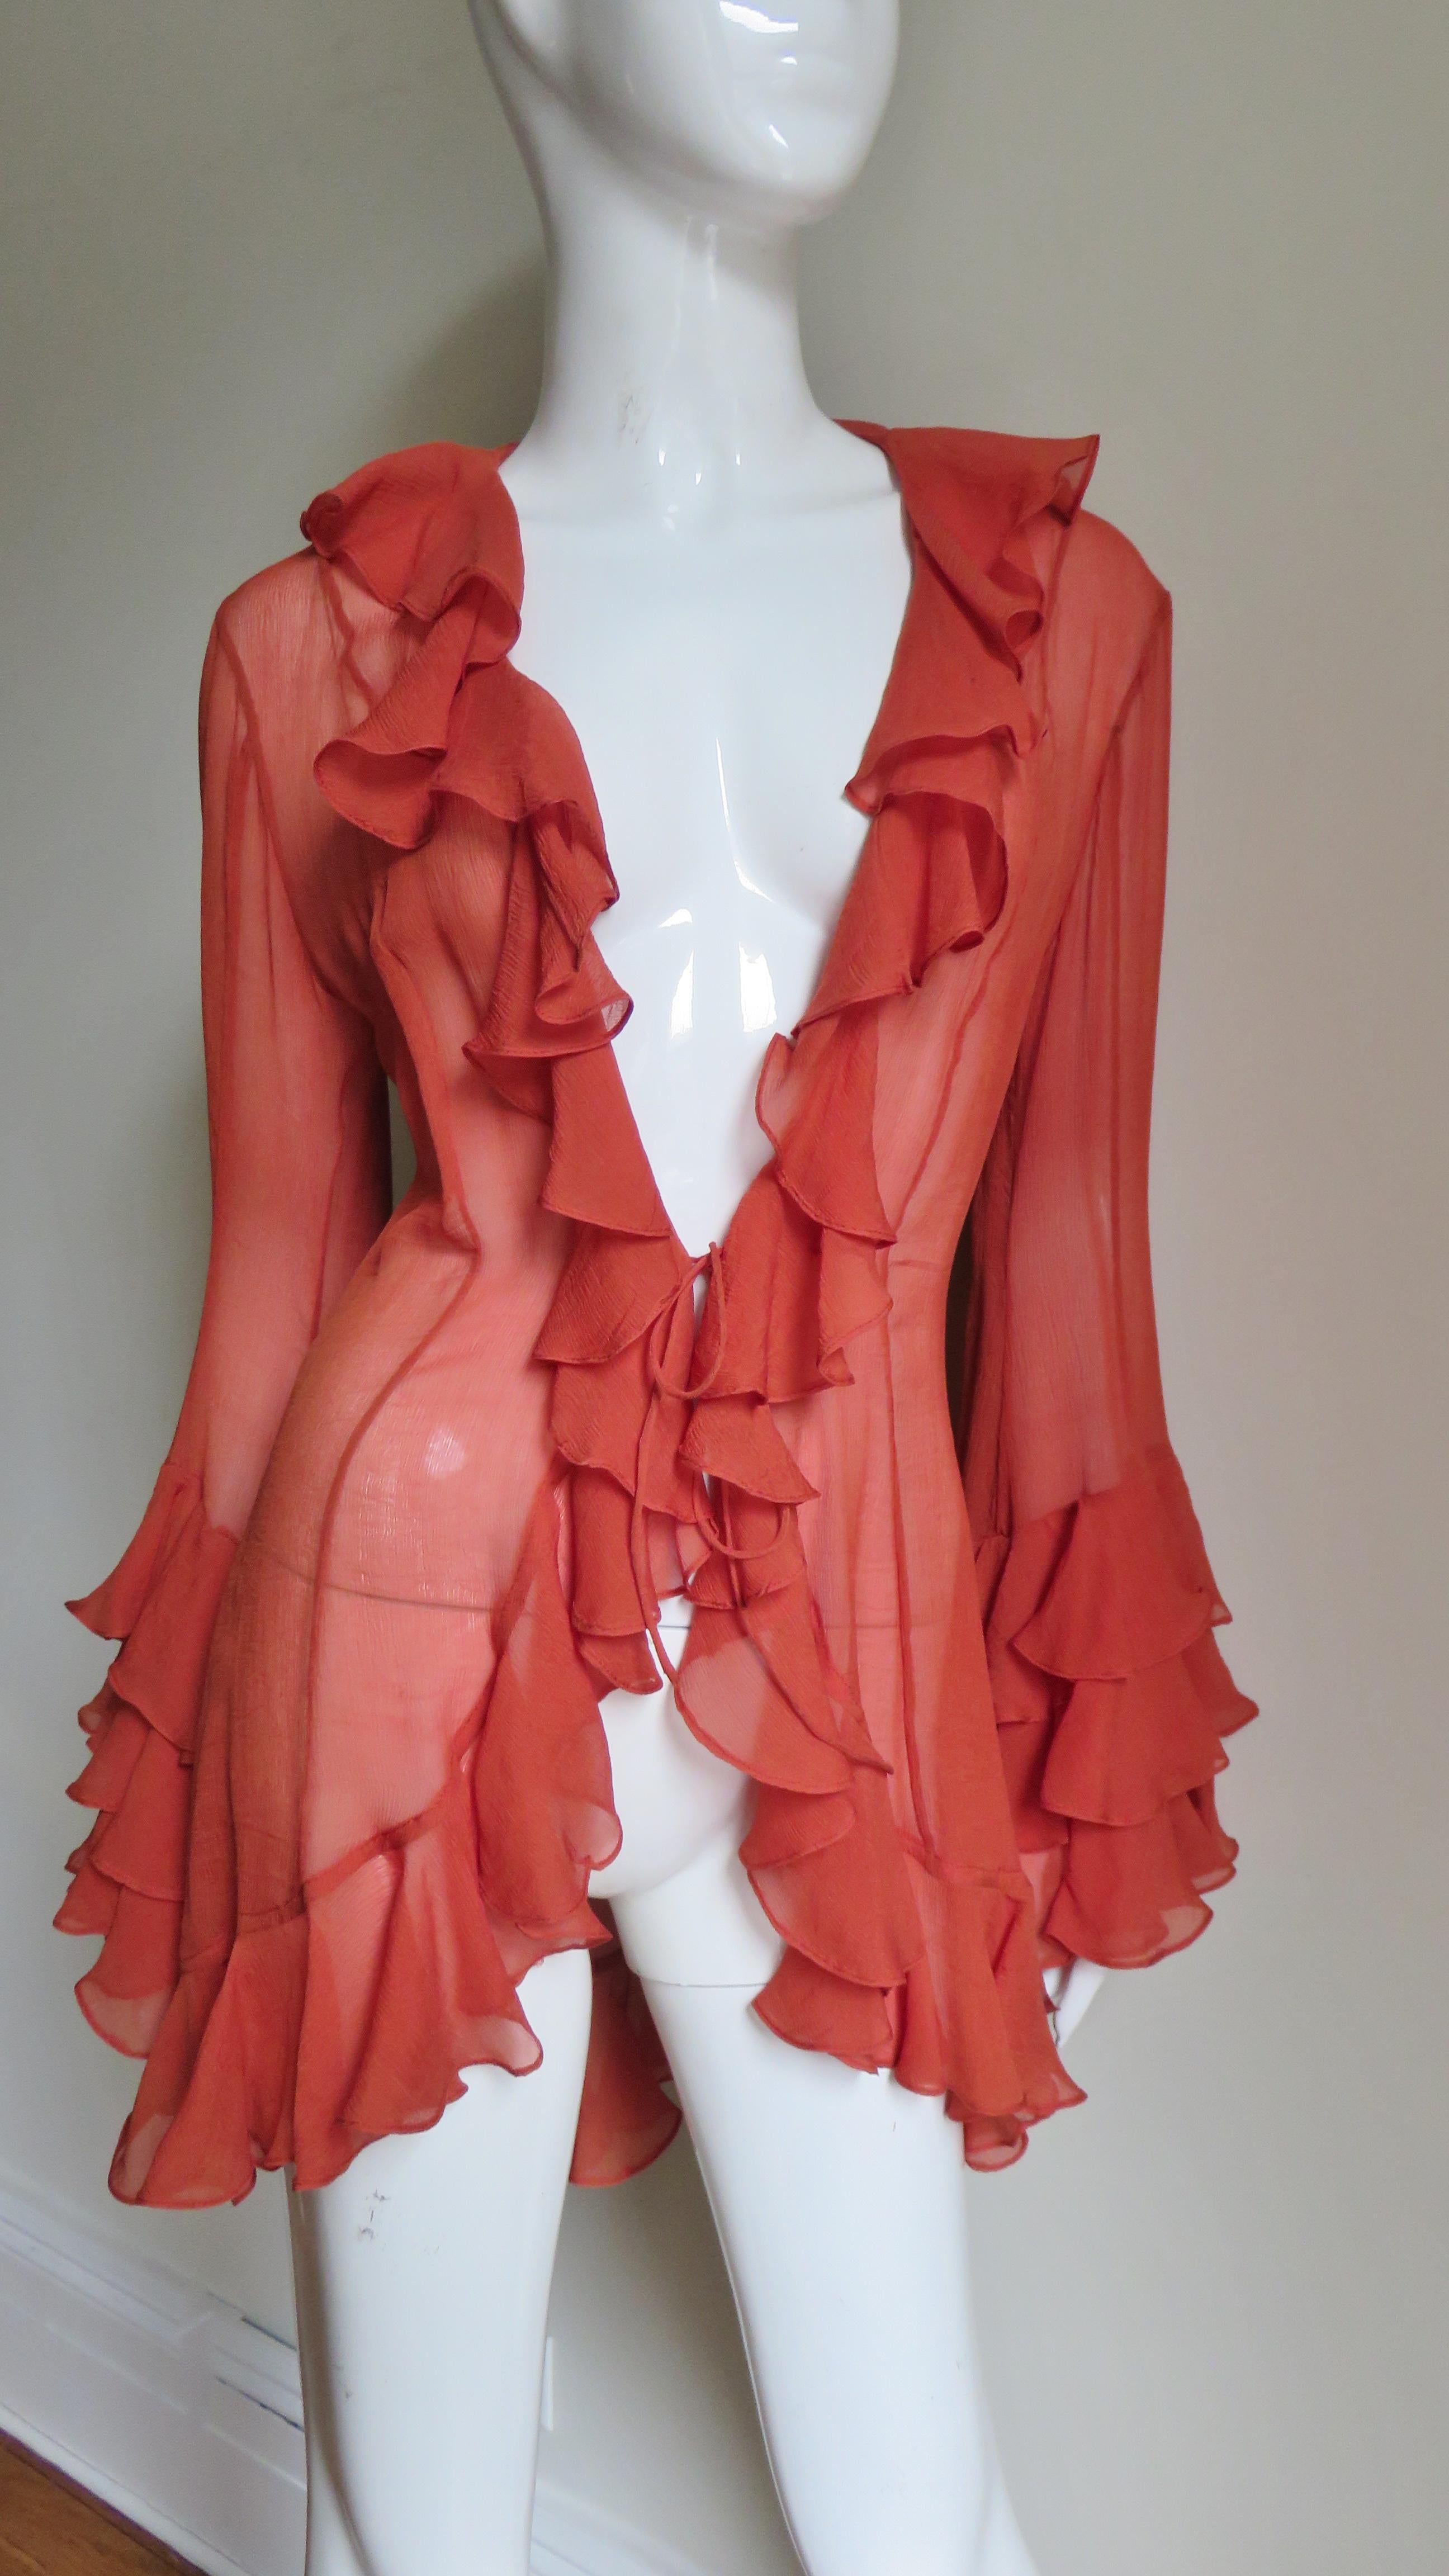 A fabulous orange silk top, shirt, blouse from Norma Kamali.  It has a ruffle around the neckline, front, and hemline plus 3 rows of them around the bottom of the bell sleeves.  It has princess seaming for a great fit, ties at the waist and it